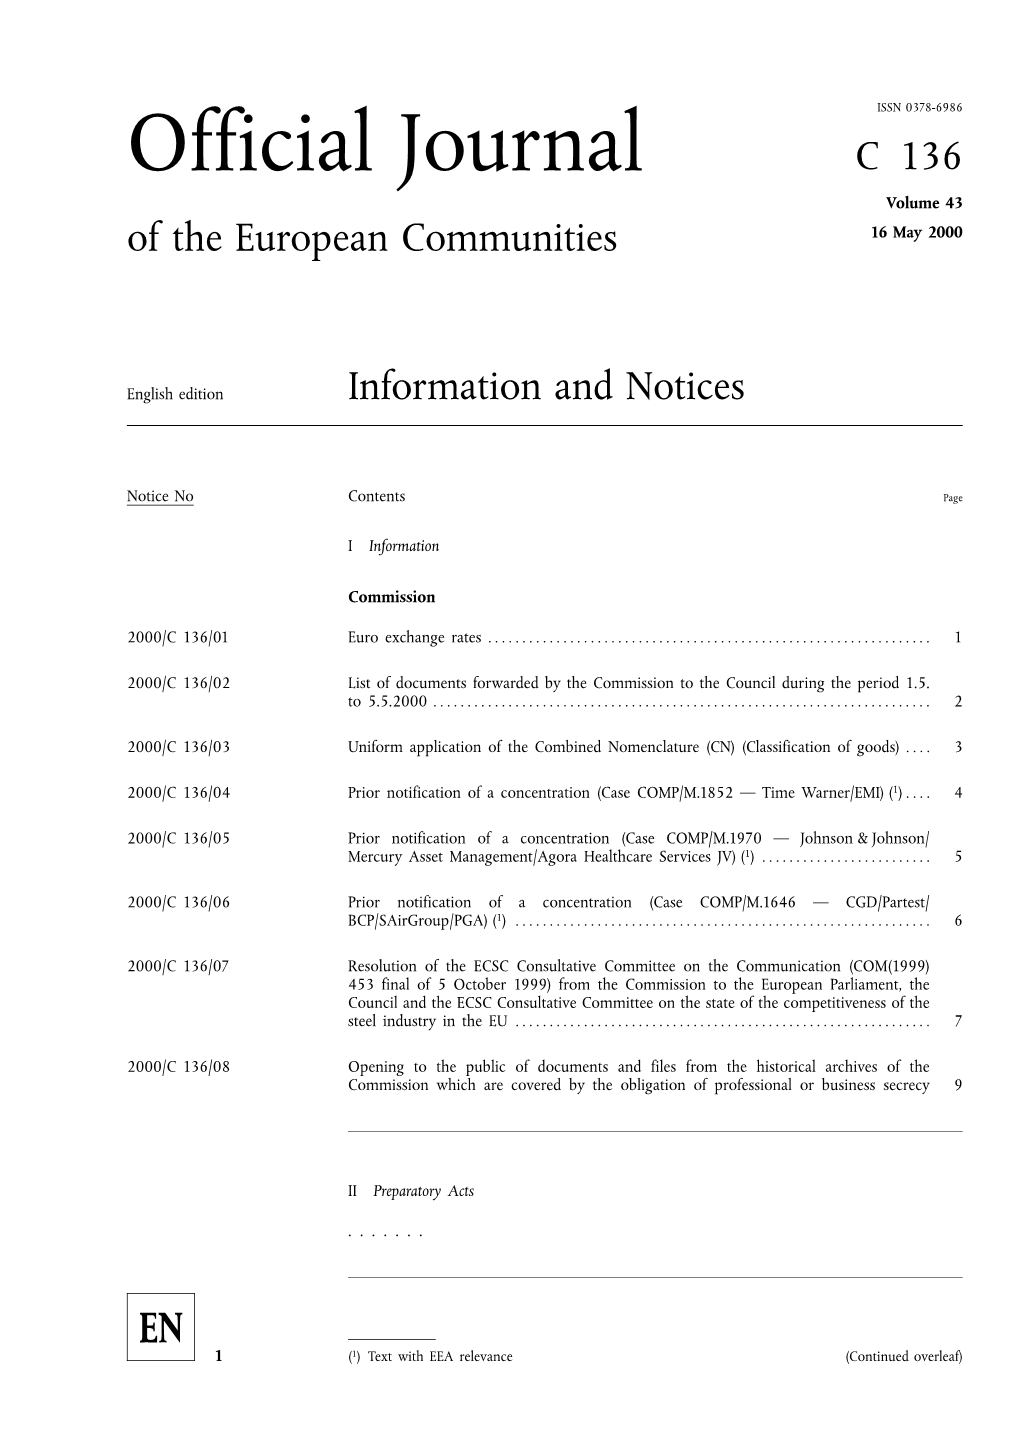 Official Journal C136 Volume 43 of the European Communities 16 May 2000